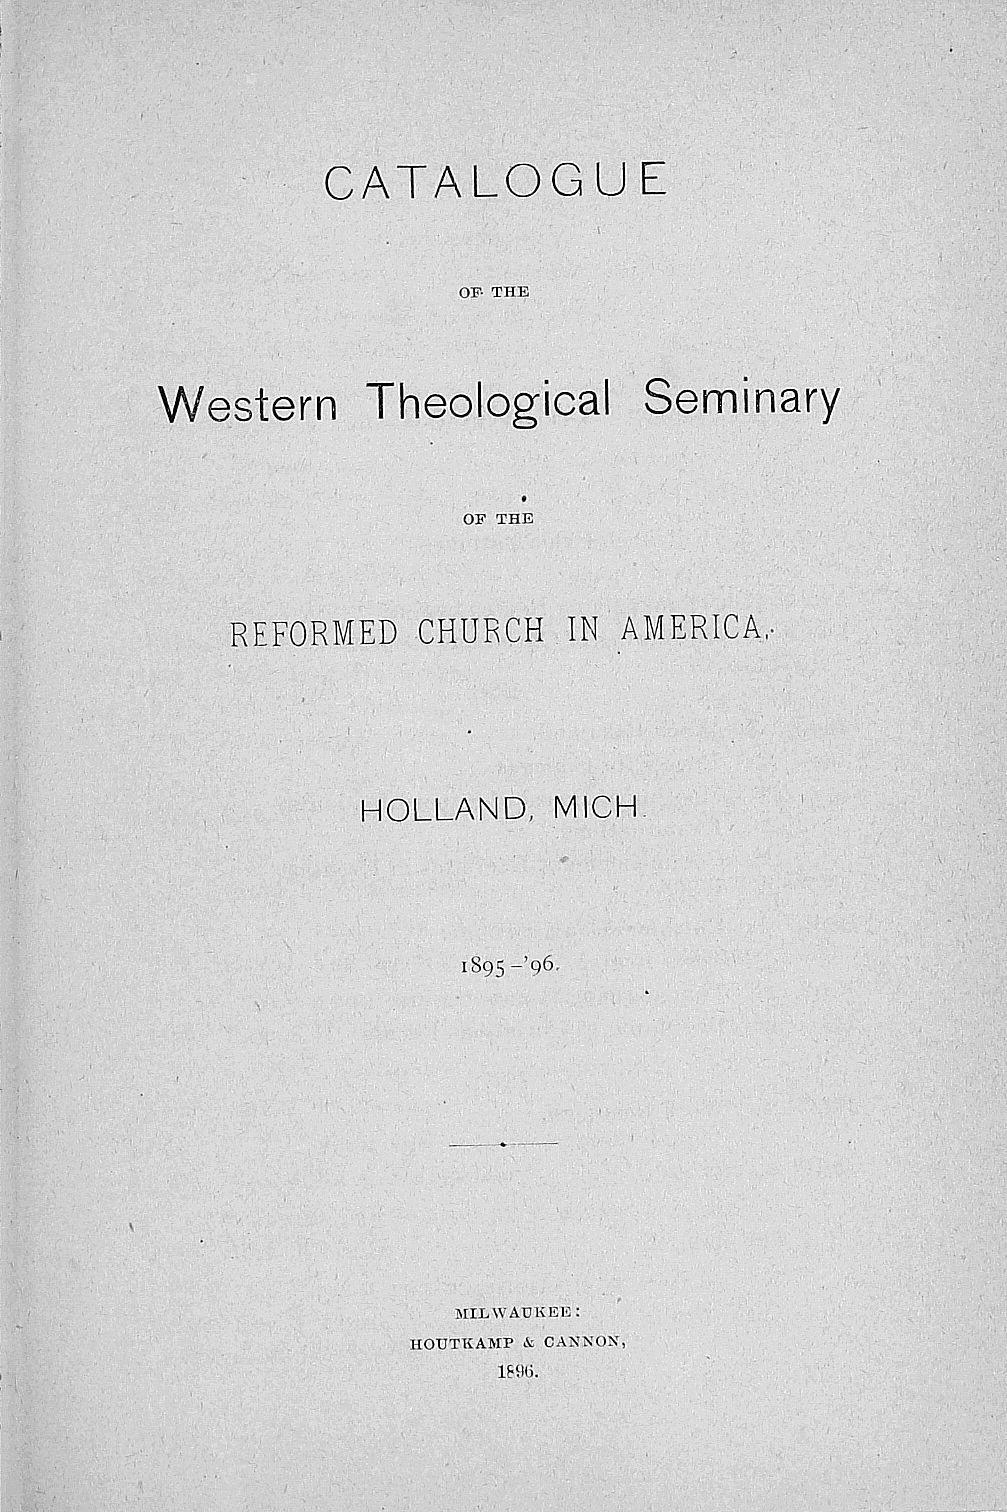 CAT ALOG U E OF- THE Western Theological Seminary OF THE REFORMED CHURCH